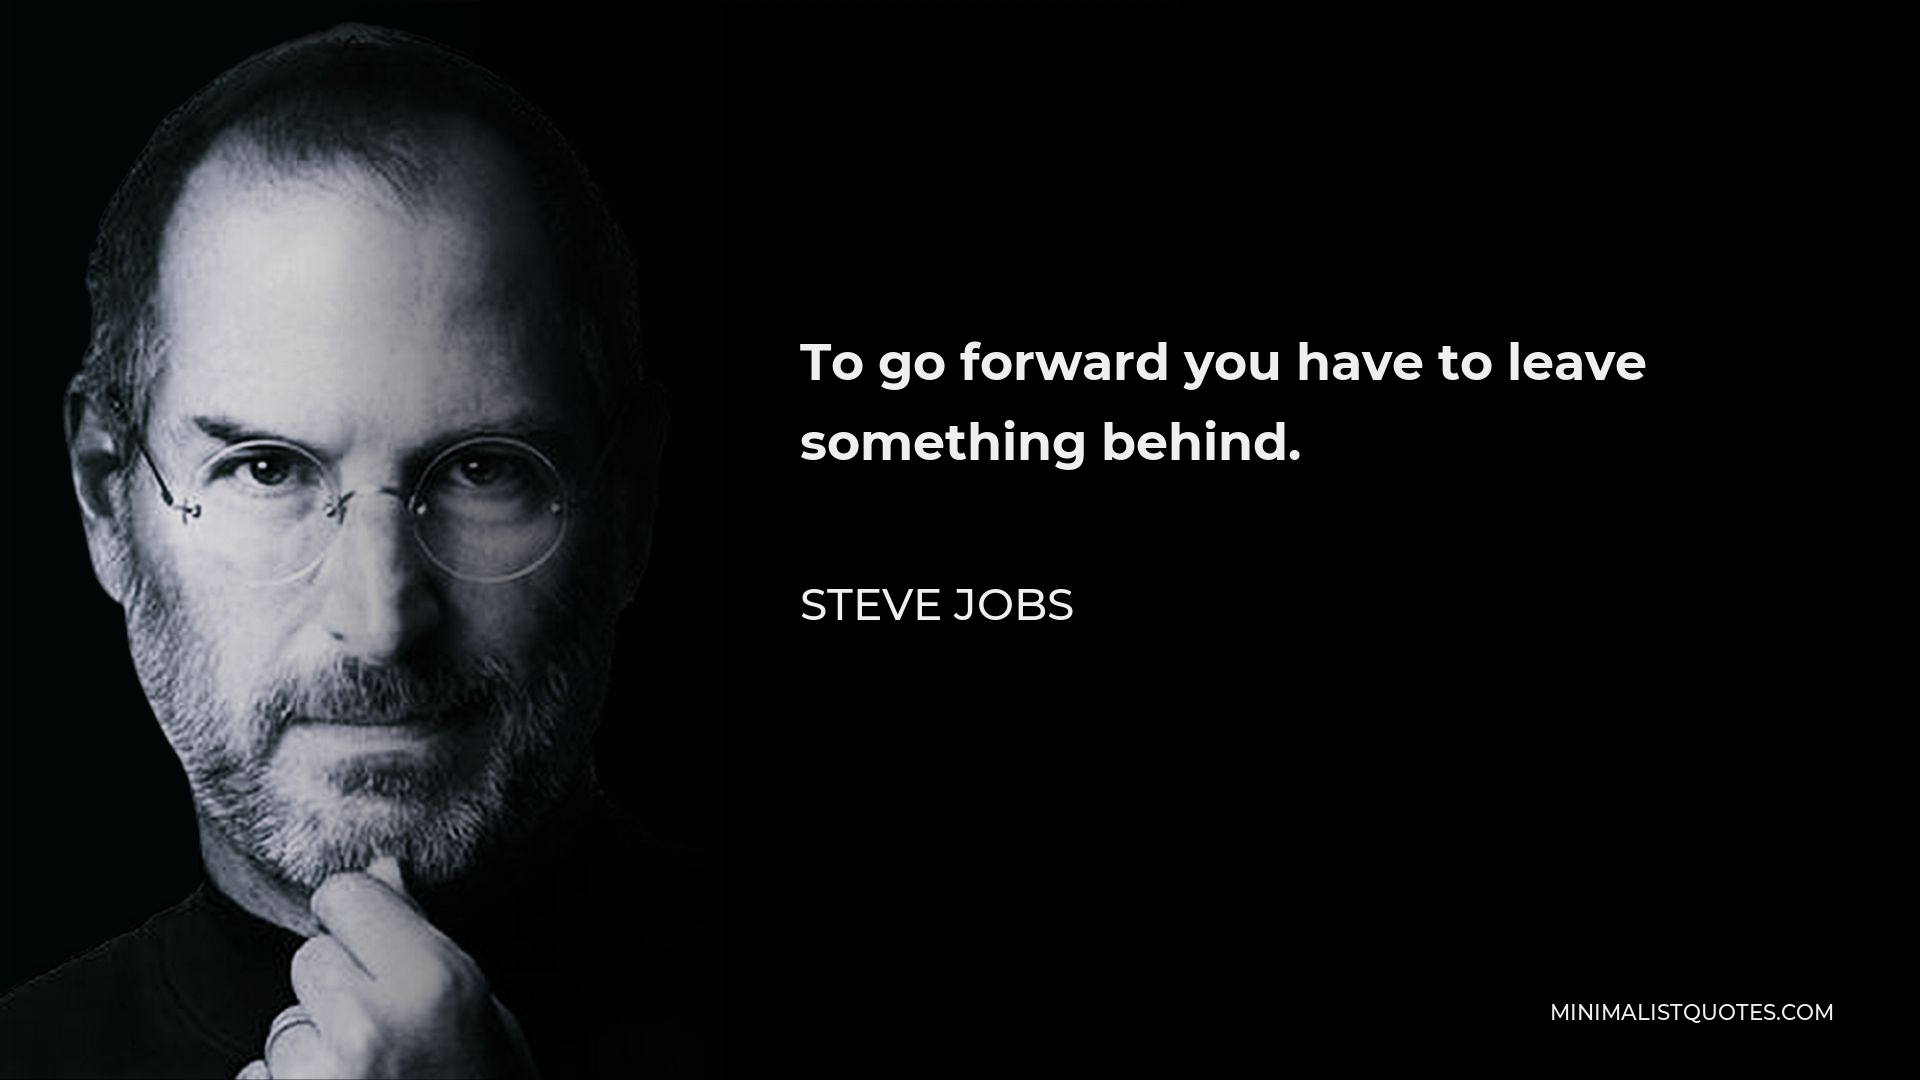 Steve Jobs Quote - To go forward you have to leave something behind.